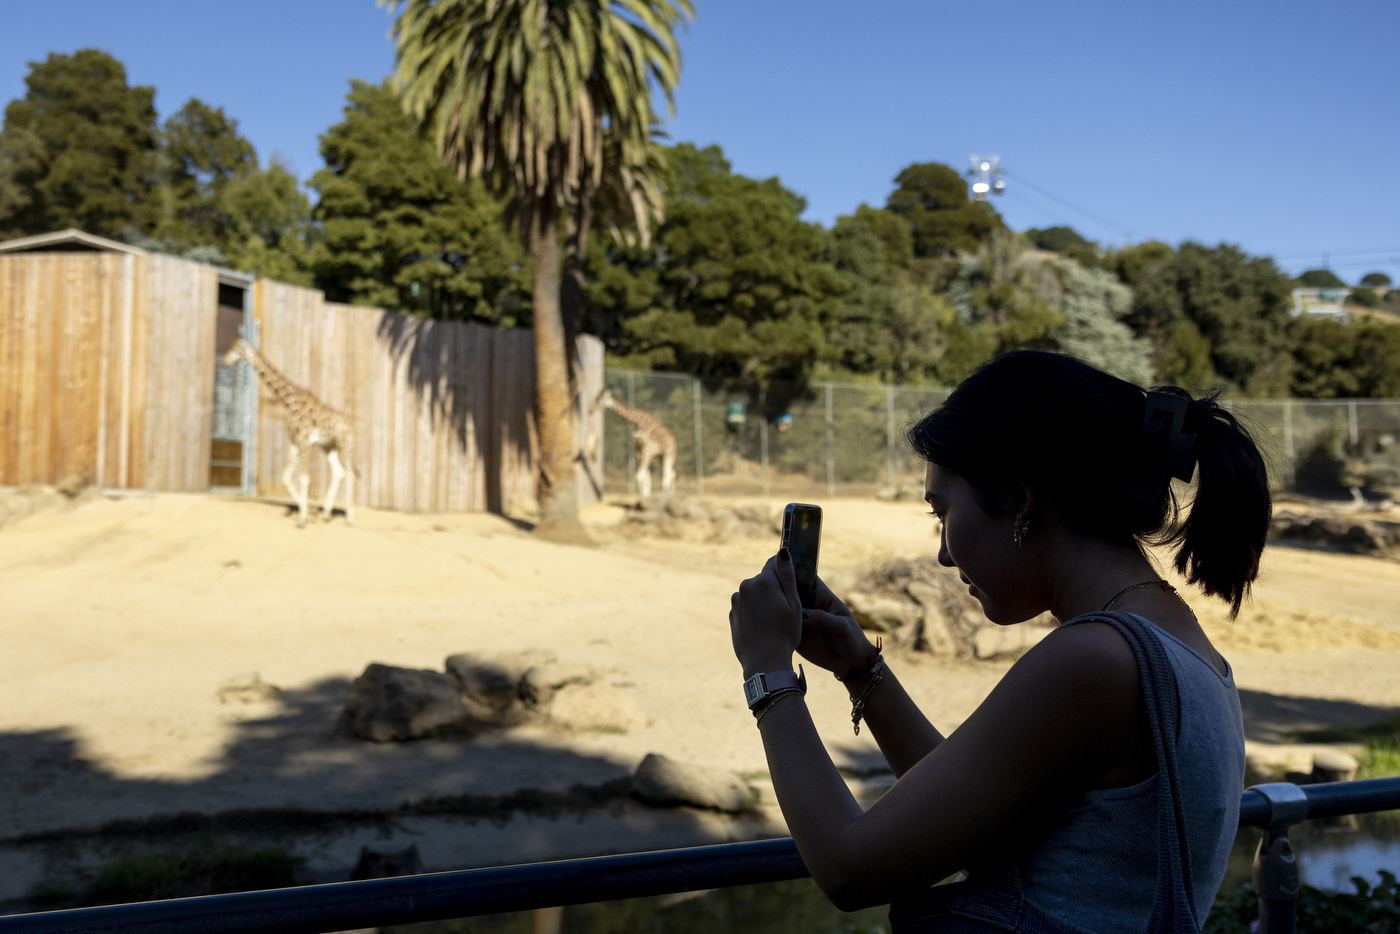 Student taking a photo of giraffes at the Oakland Zoo.